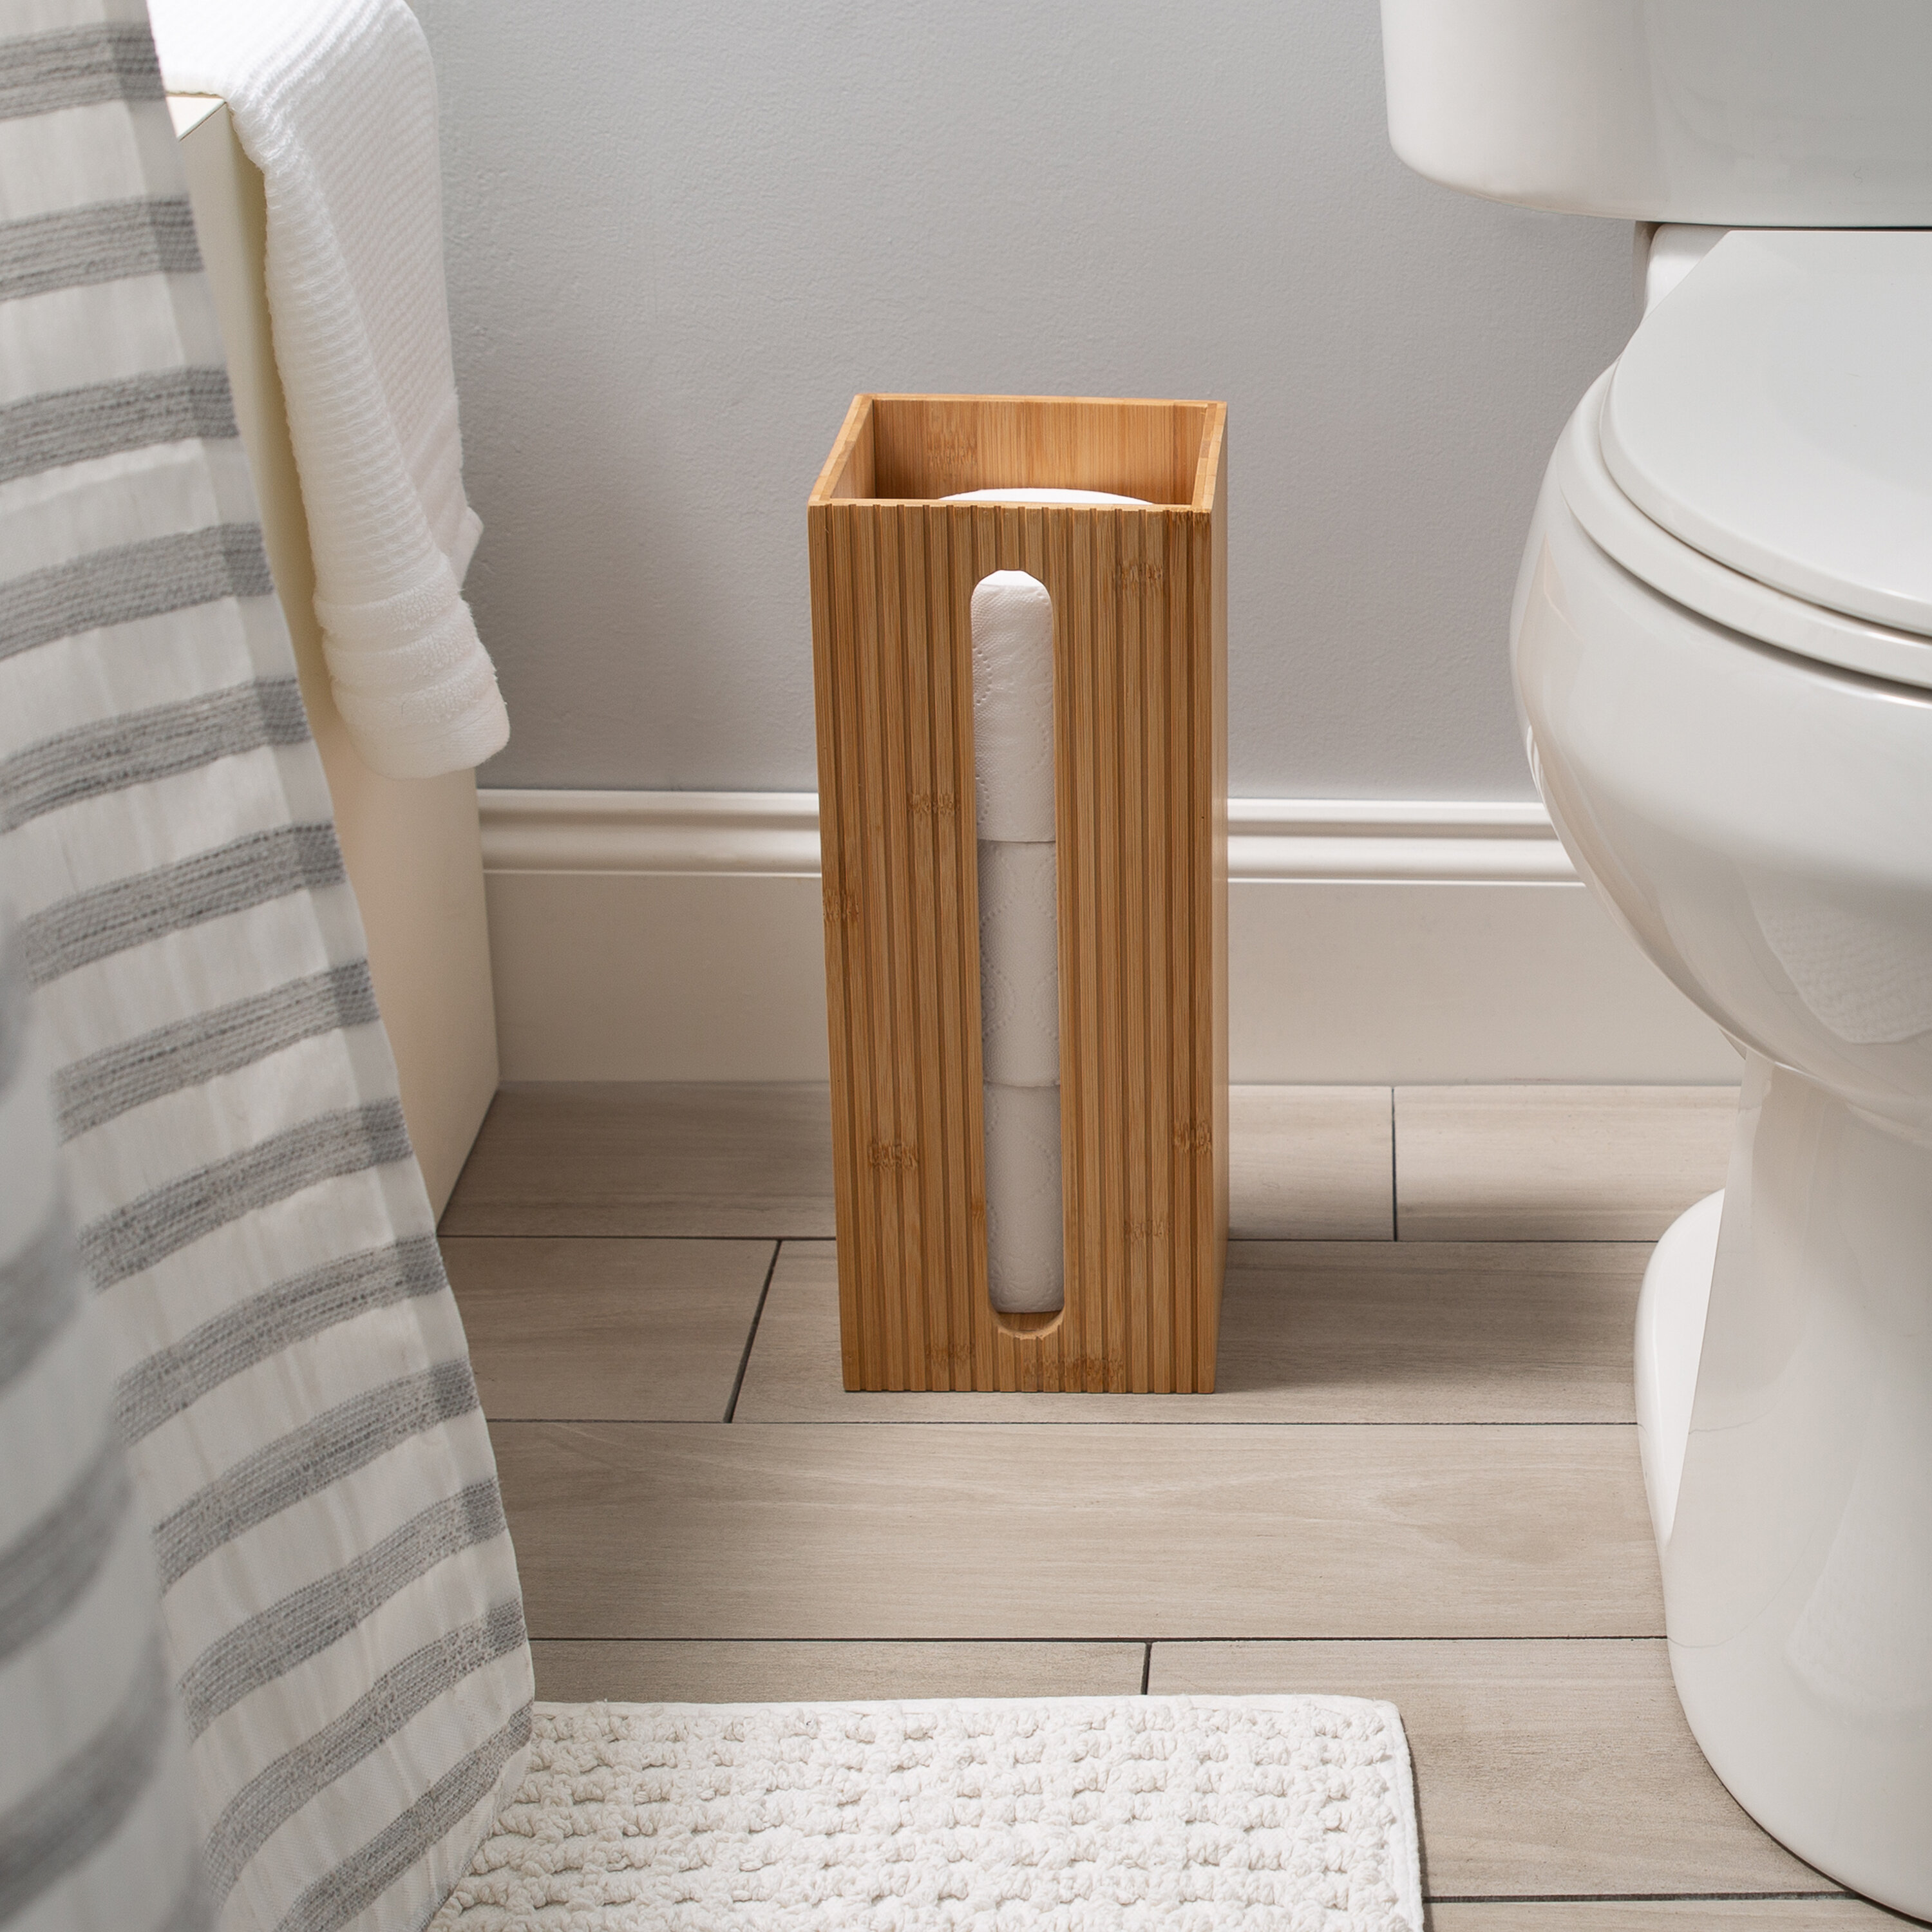 Bamboo Toilet Paper Holder perfect for toilet paper storage or general bathroom storage a freestanding toilet paper holder handmade from biodegradable bamboo 